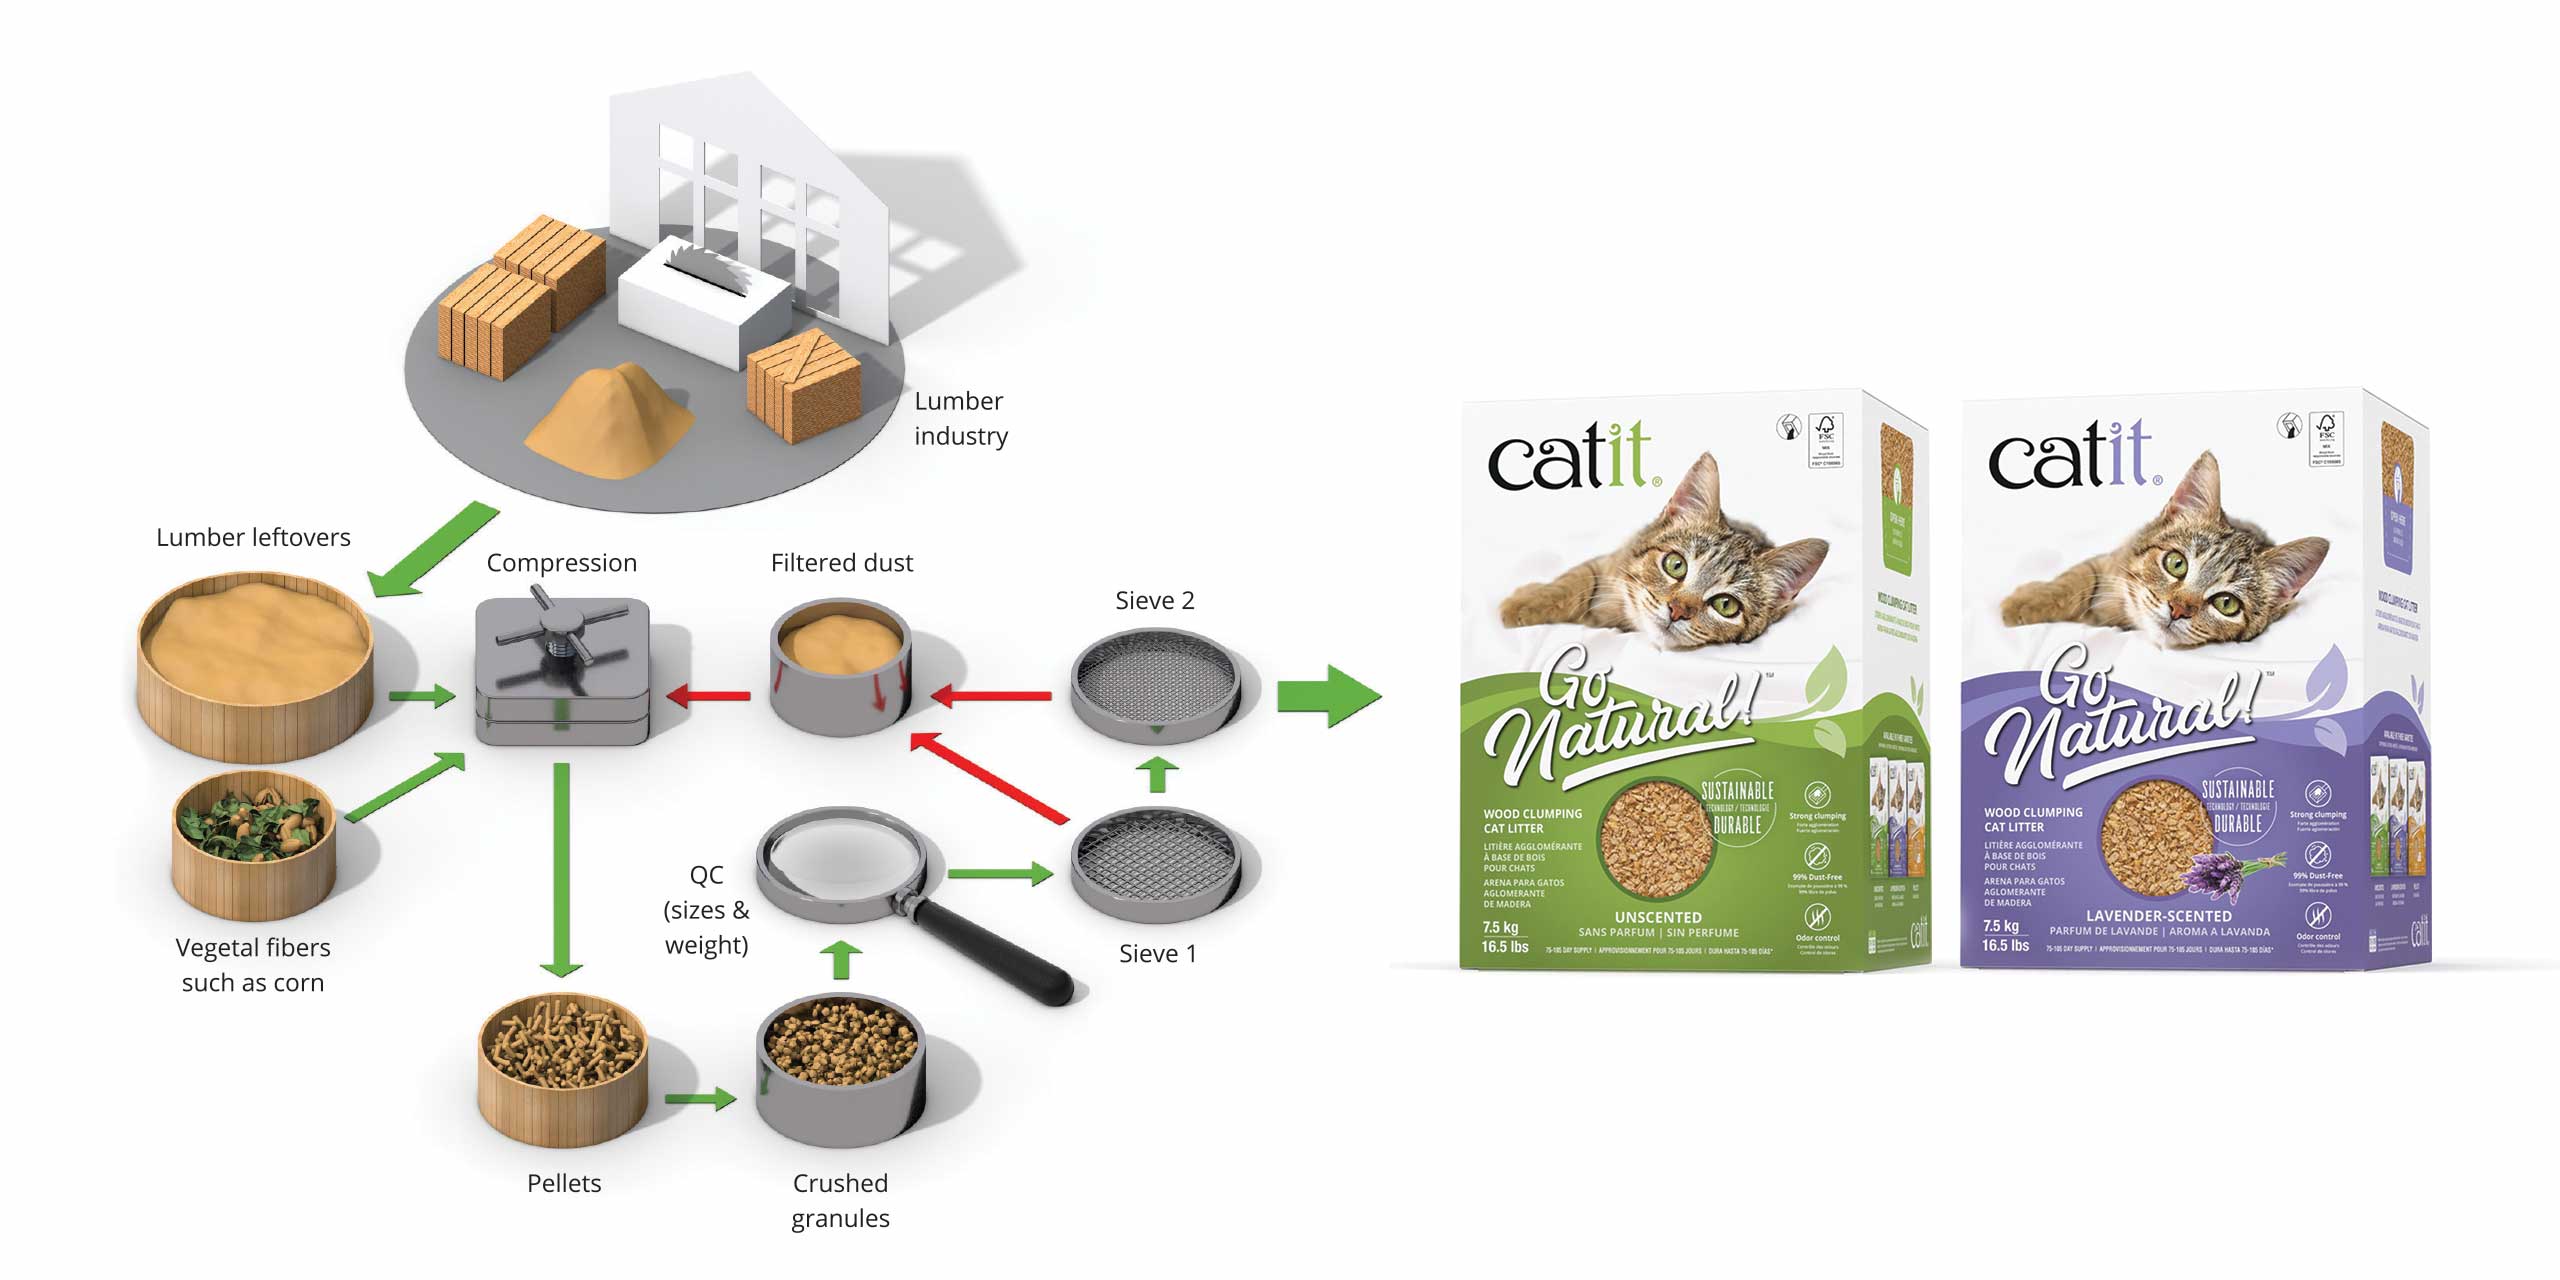 Sustainably produced cat litter using a 'cold' process